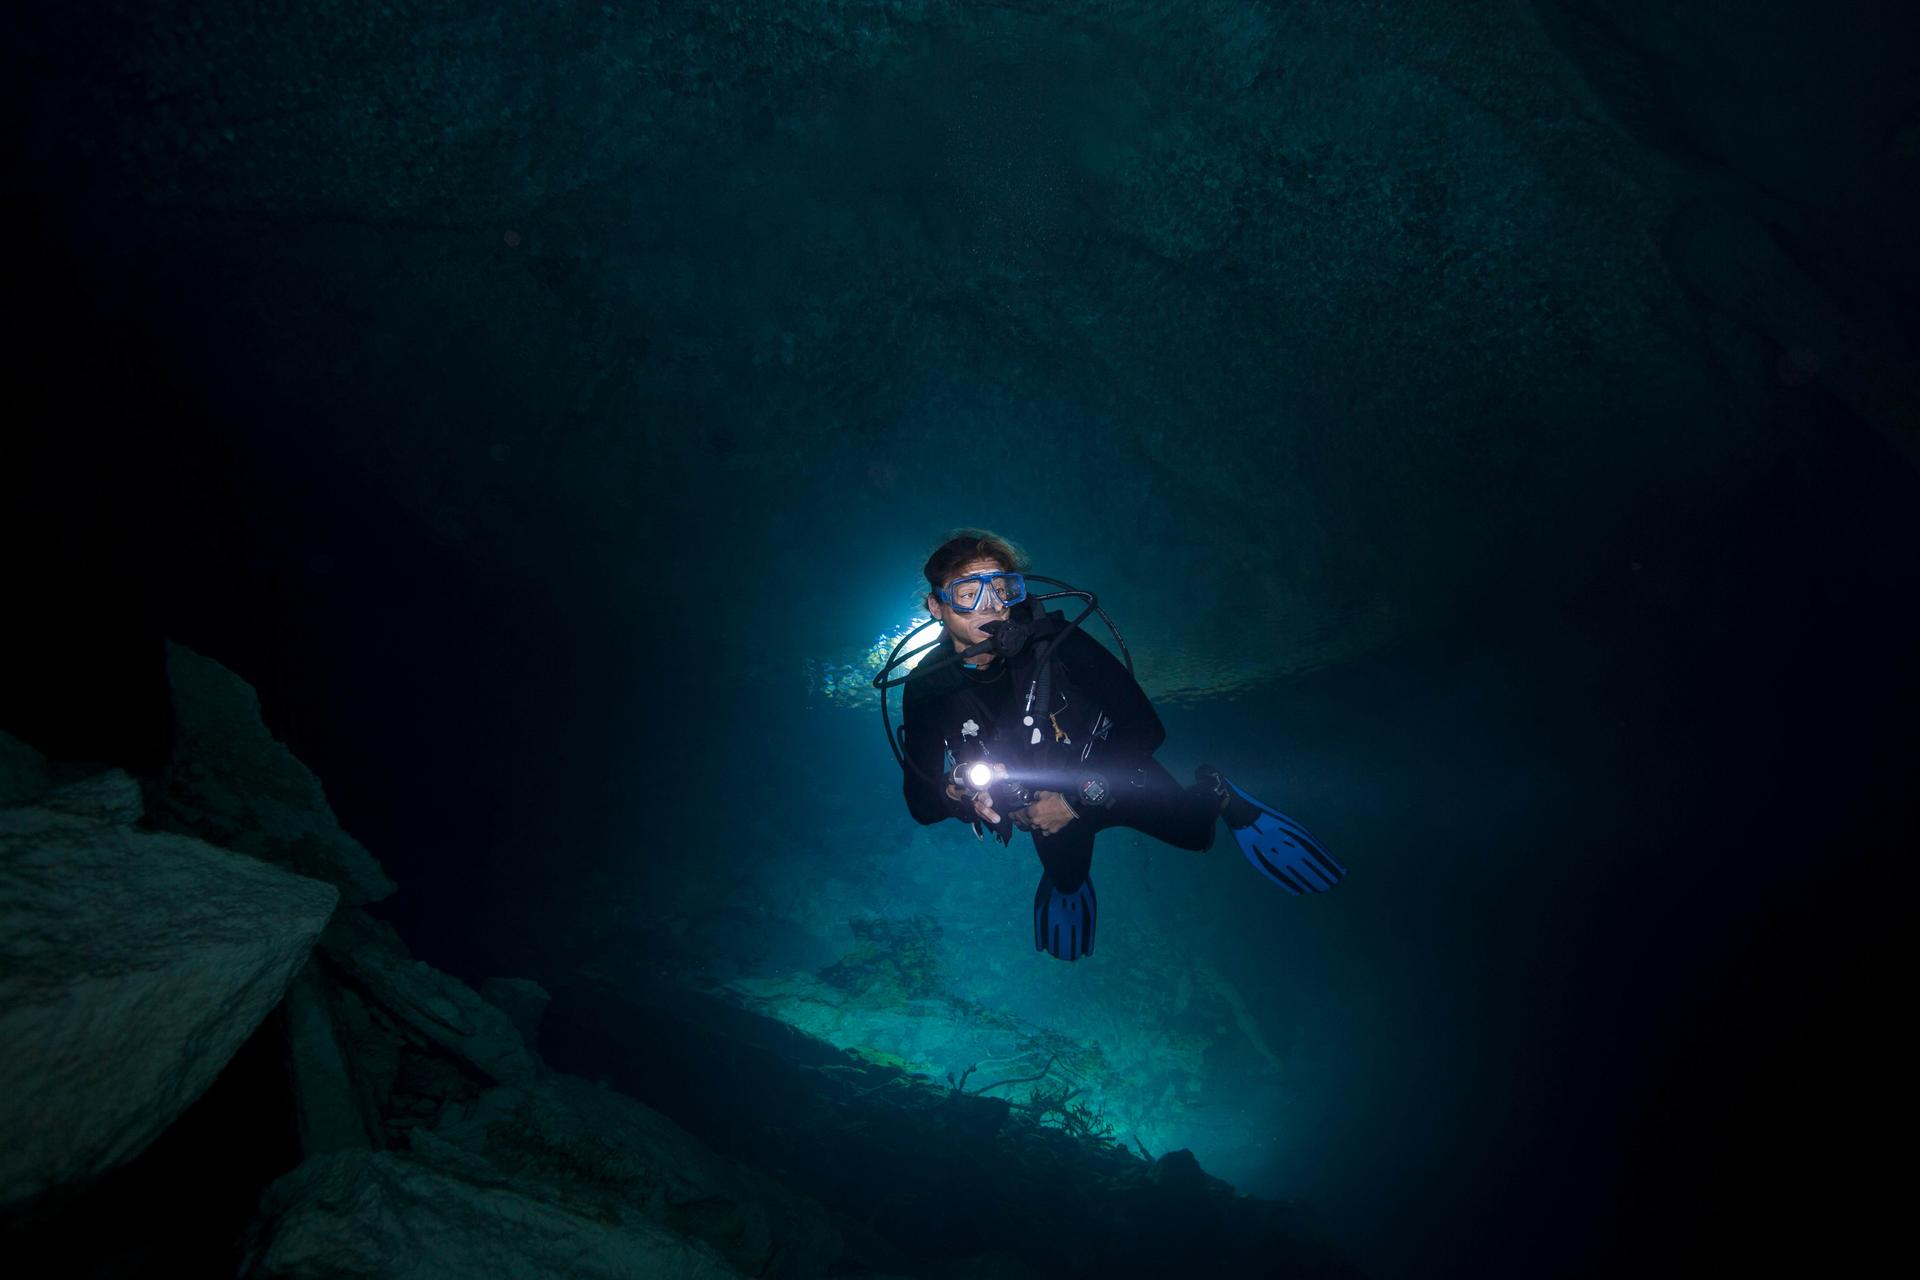 Underwater image of a scuba diver holding a large flashlight in an underwater cave in The Bahamas